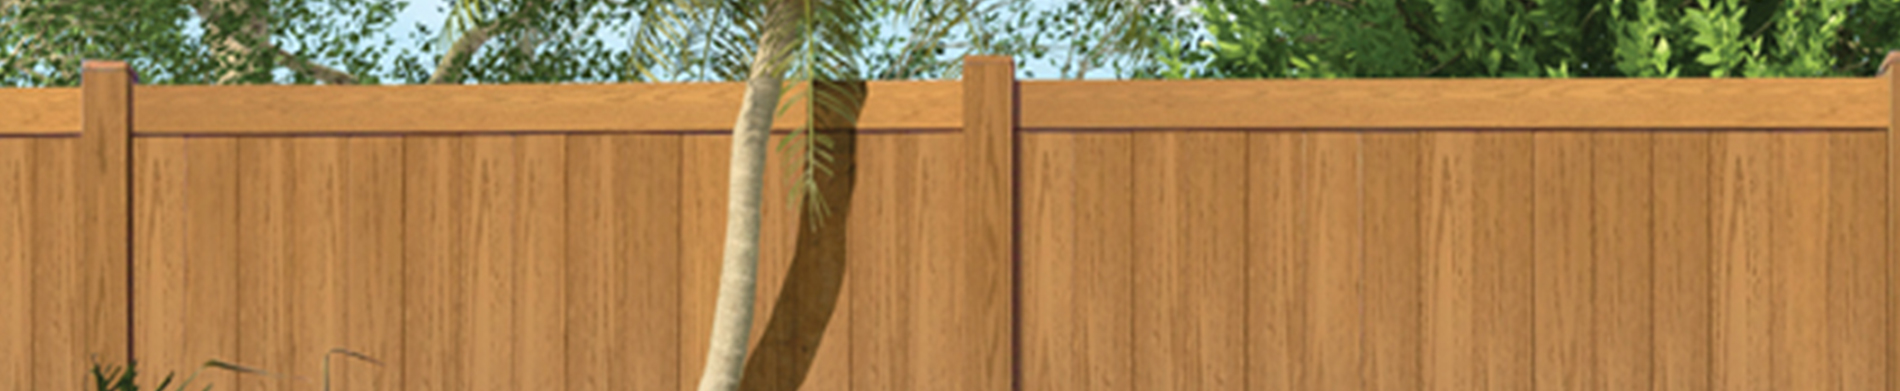 Experience Aesthetics and Benefits With Custom Vinyl Fencing